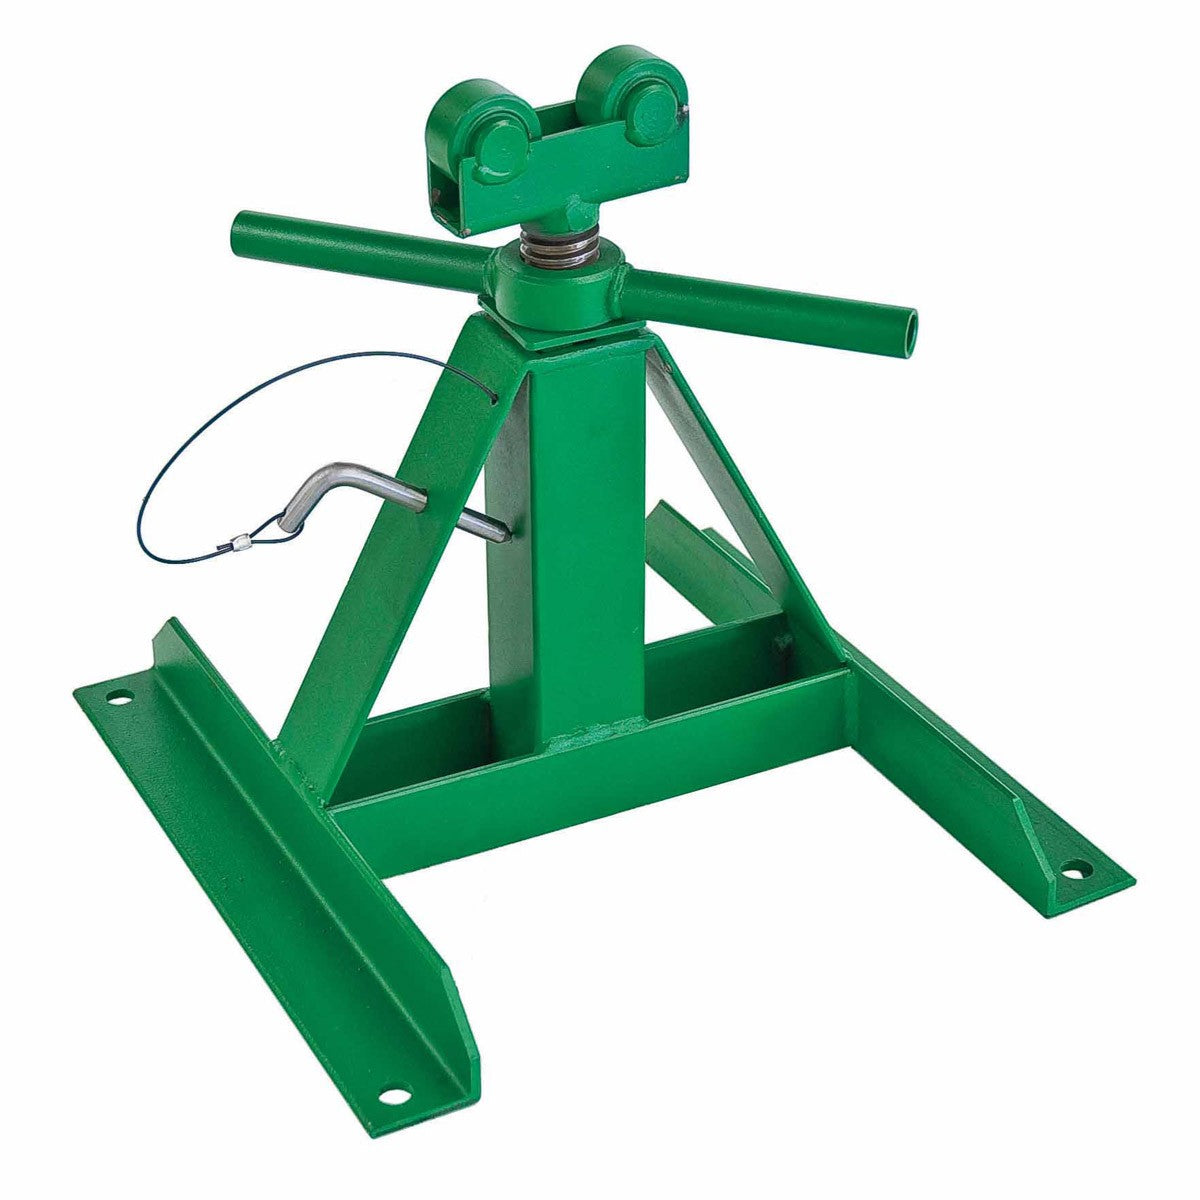 Greenlee 687 Screw-Type Reel Stand 13" - 28" (1 Stand Only)